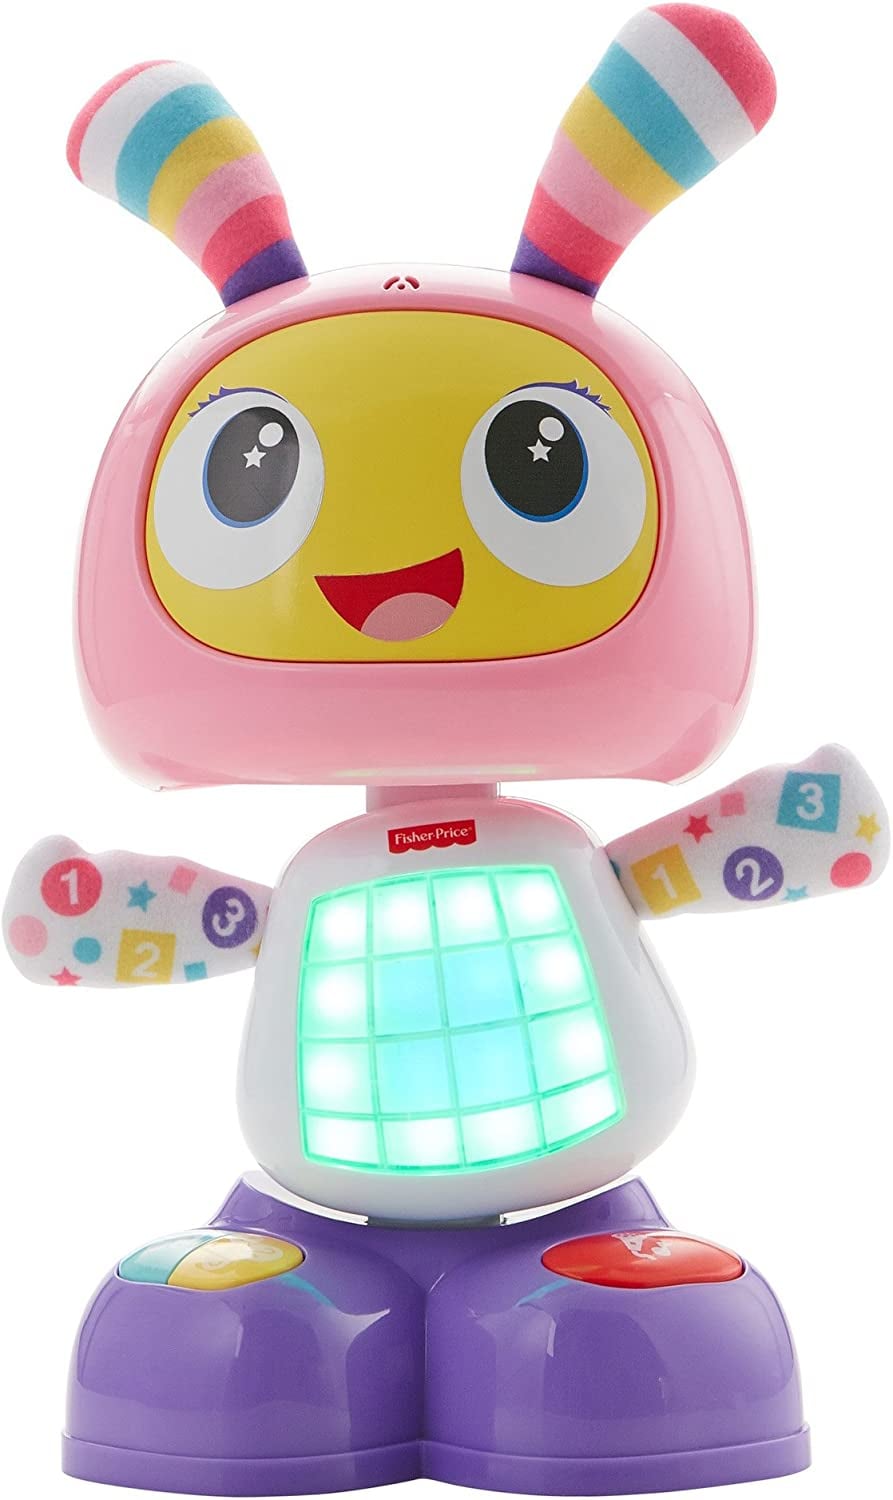 fisher price beatbo dance and move